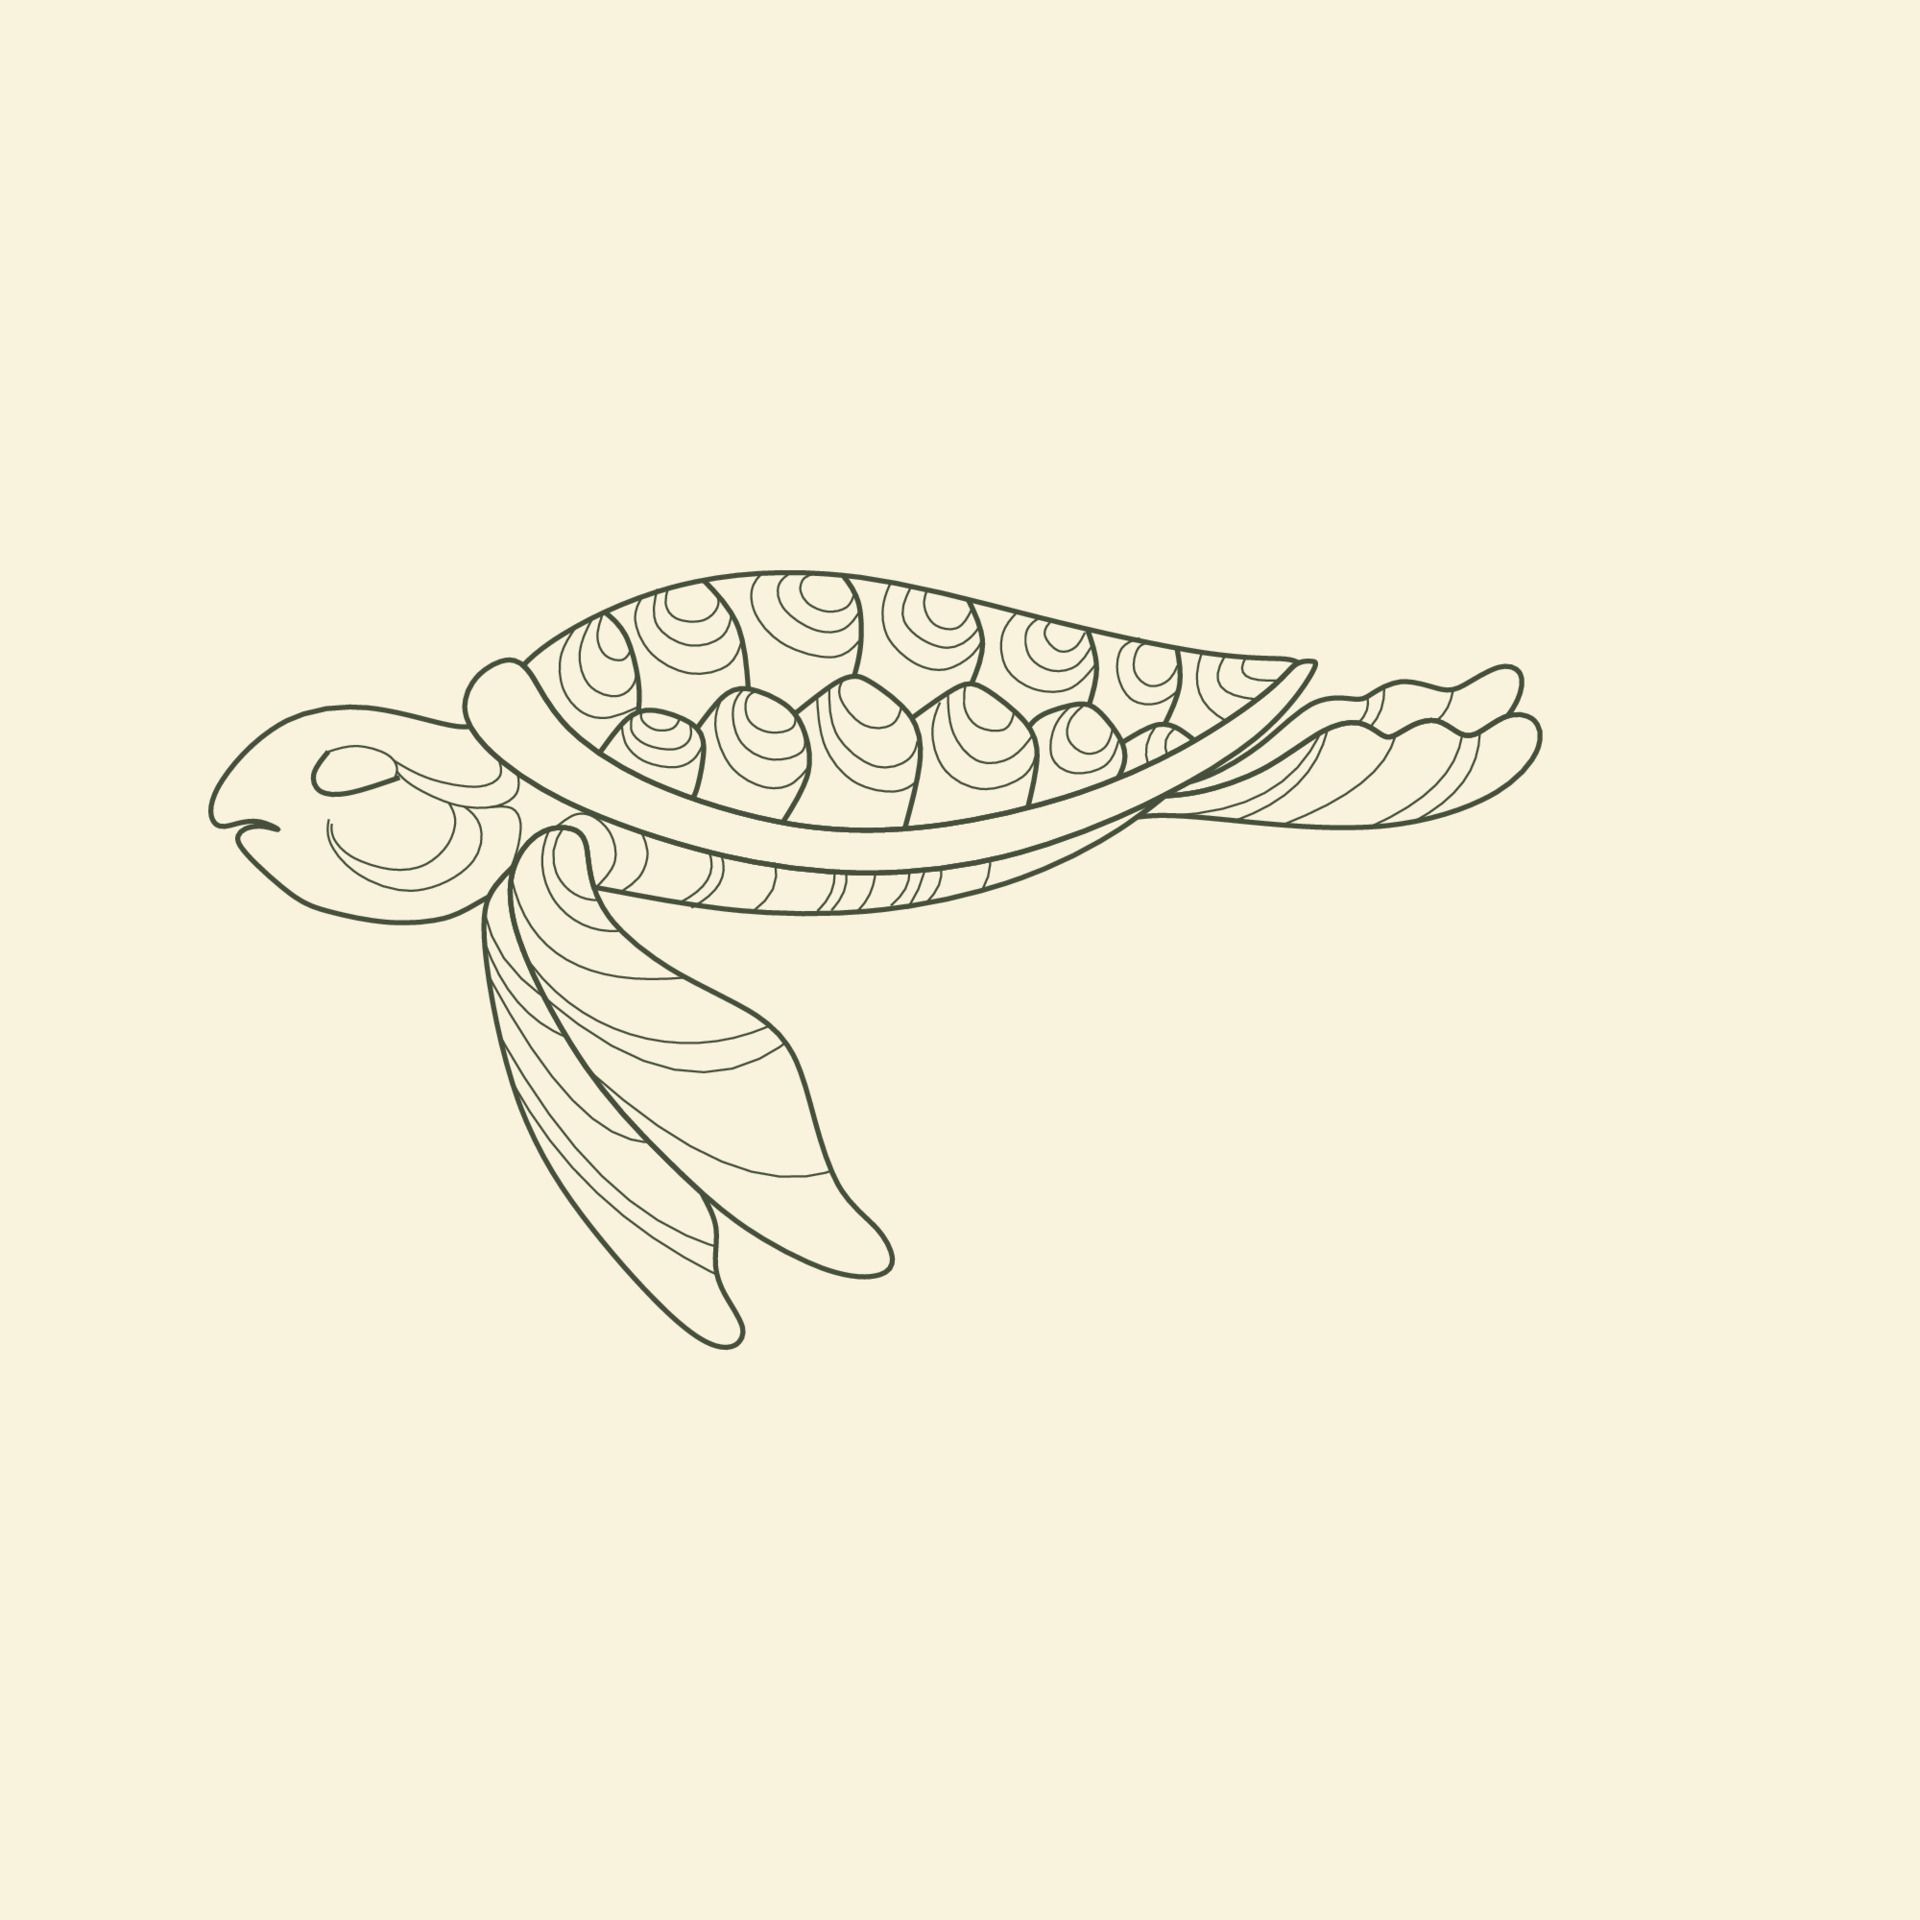 Turtle Line art Vector. Turtle Line art Graphic design for coloring book and wall decoration